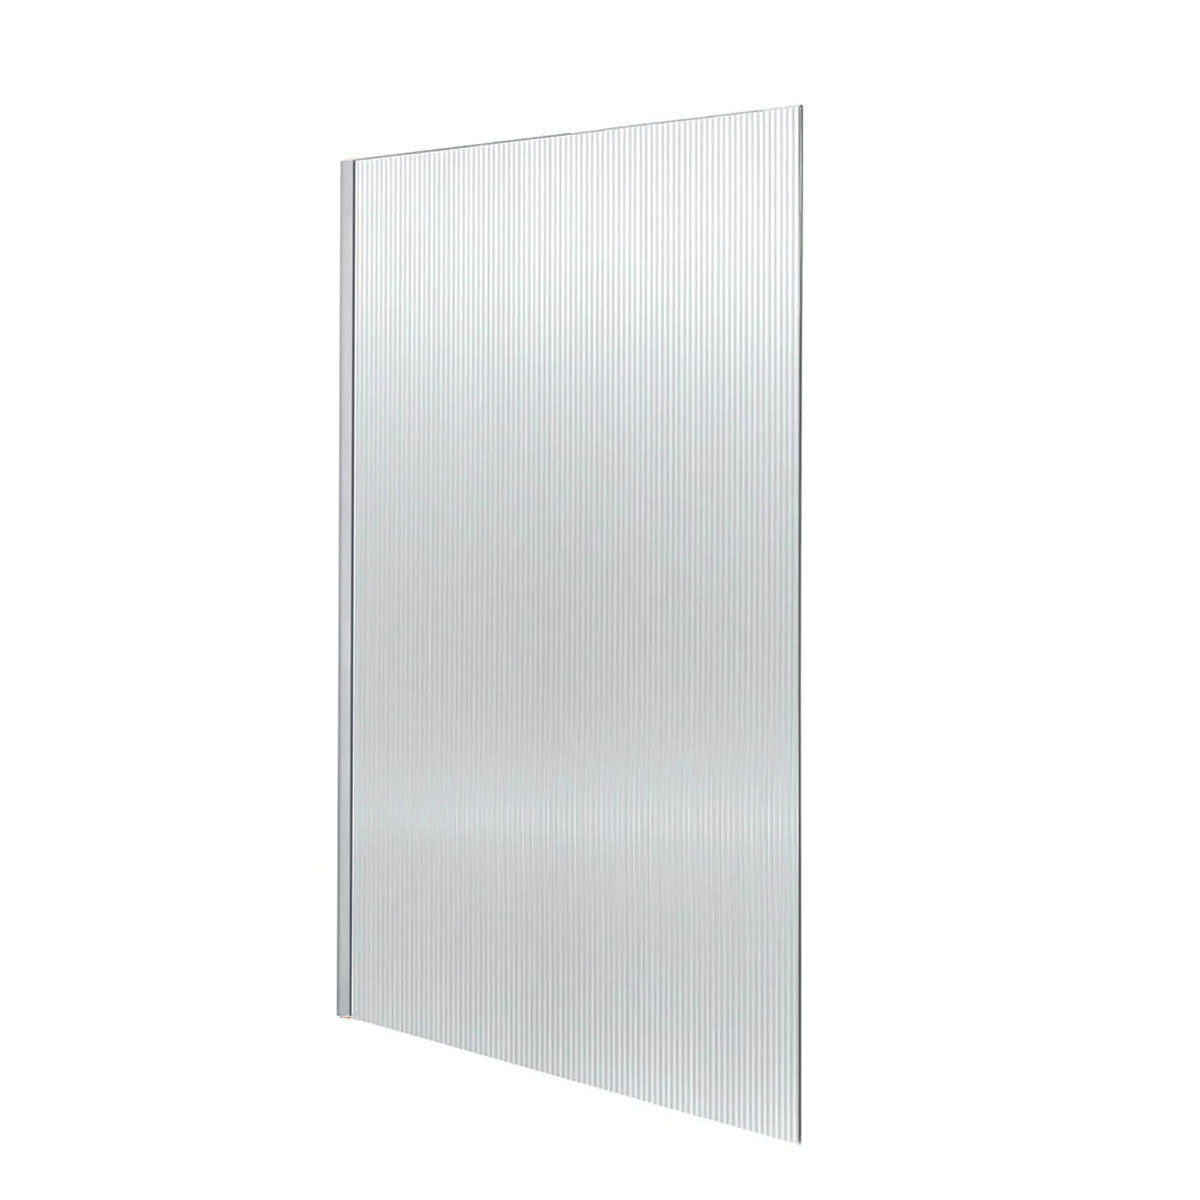 Granlusso 8mm Toughened Glass Shower Screen Panel Fluted Fixed stainless steel